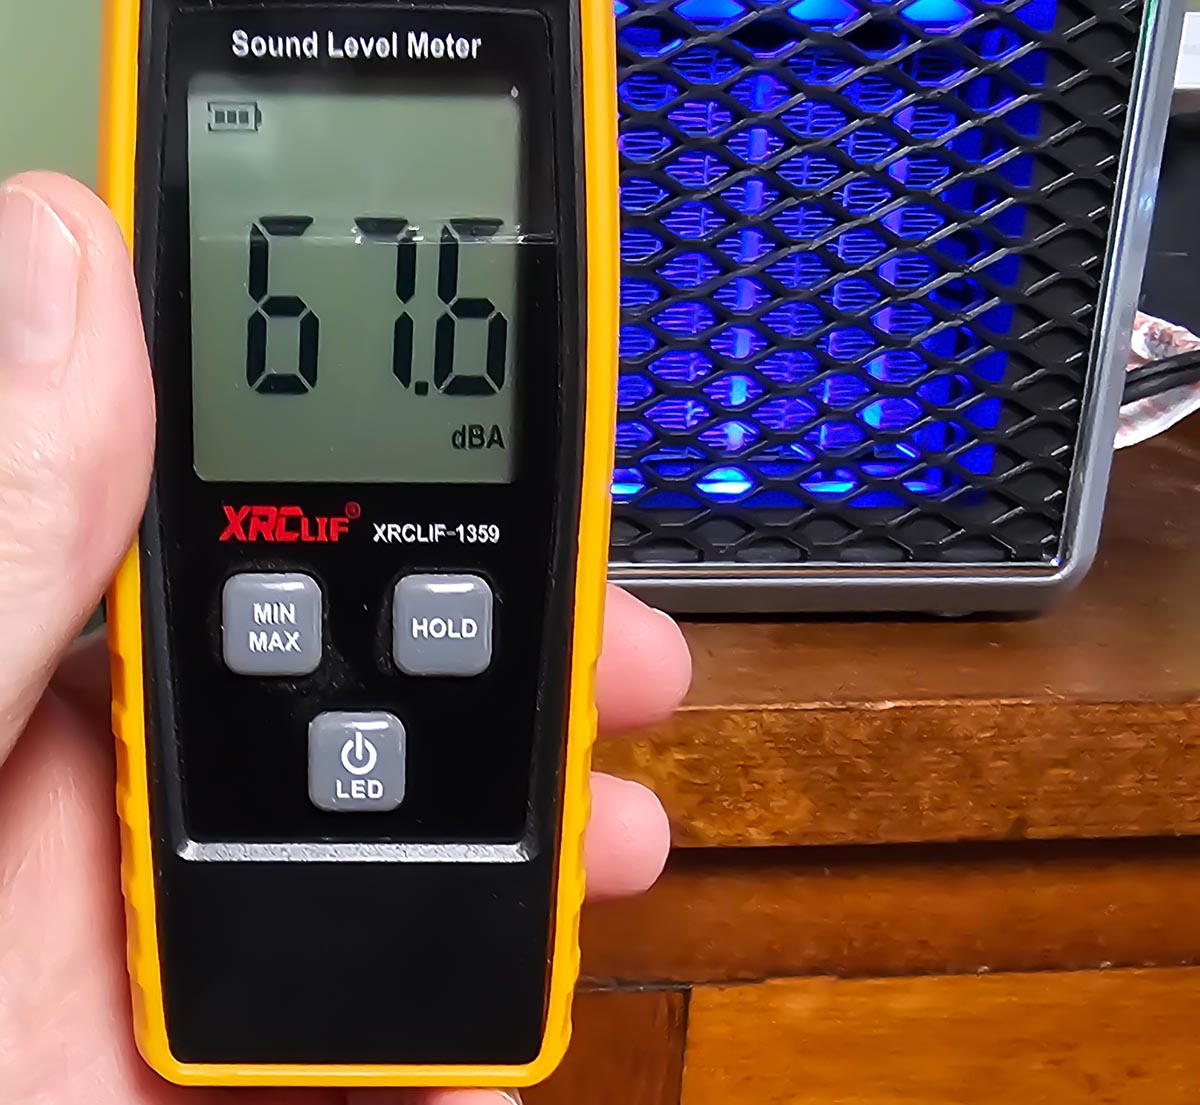 Handy Heater Review